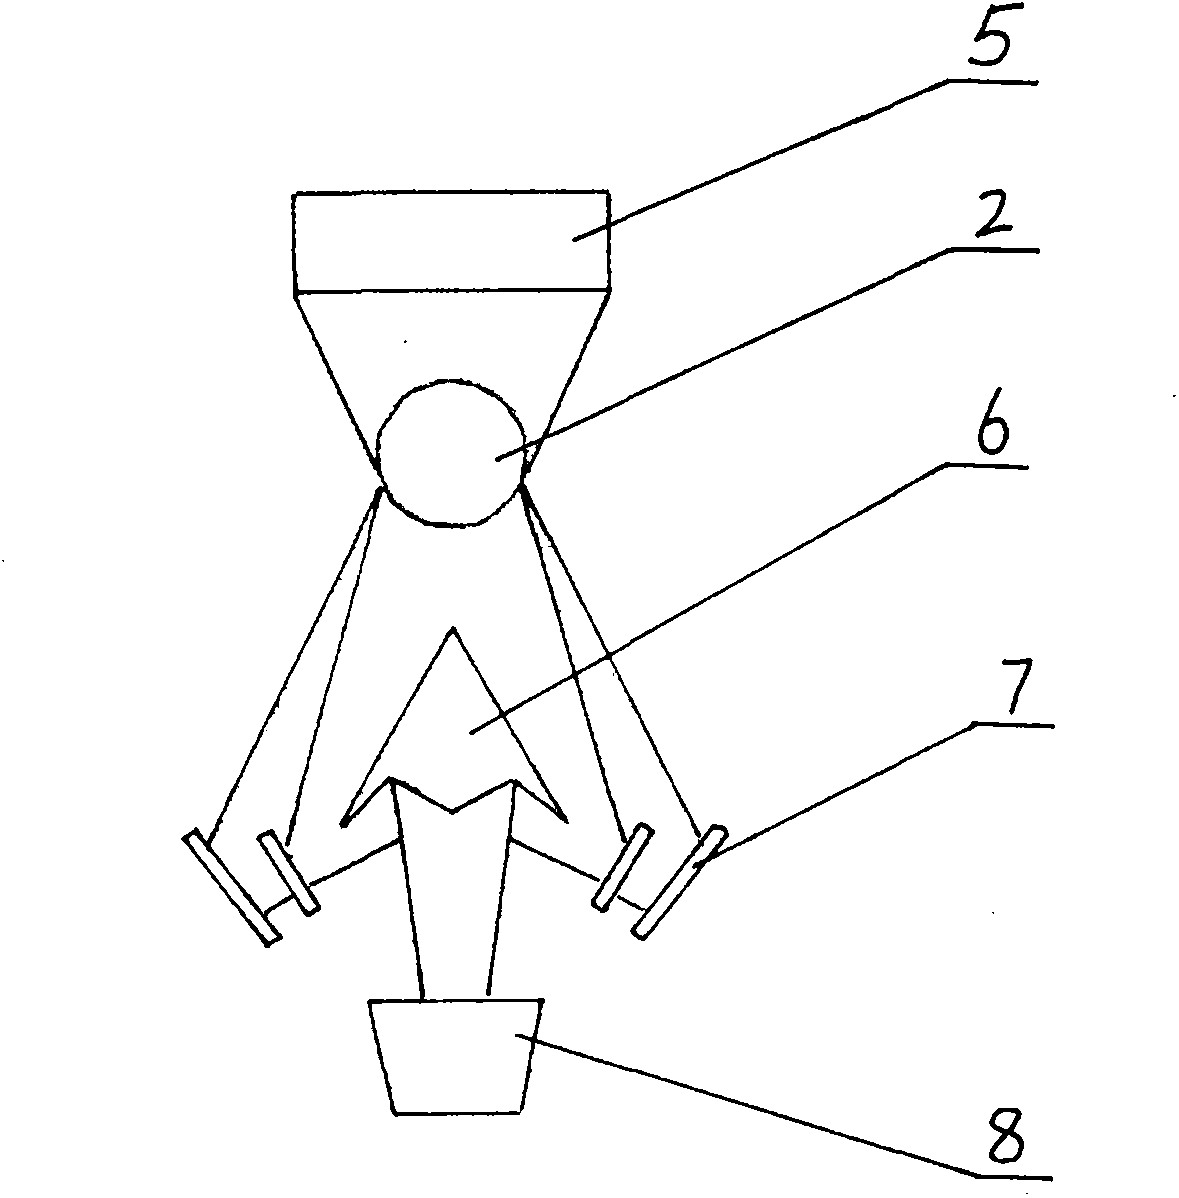 Method and device for detecting wall of cylindrical transparent bottle